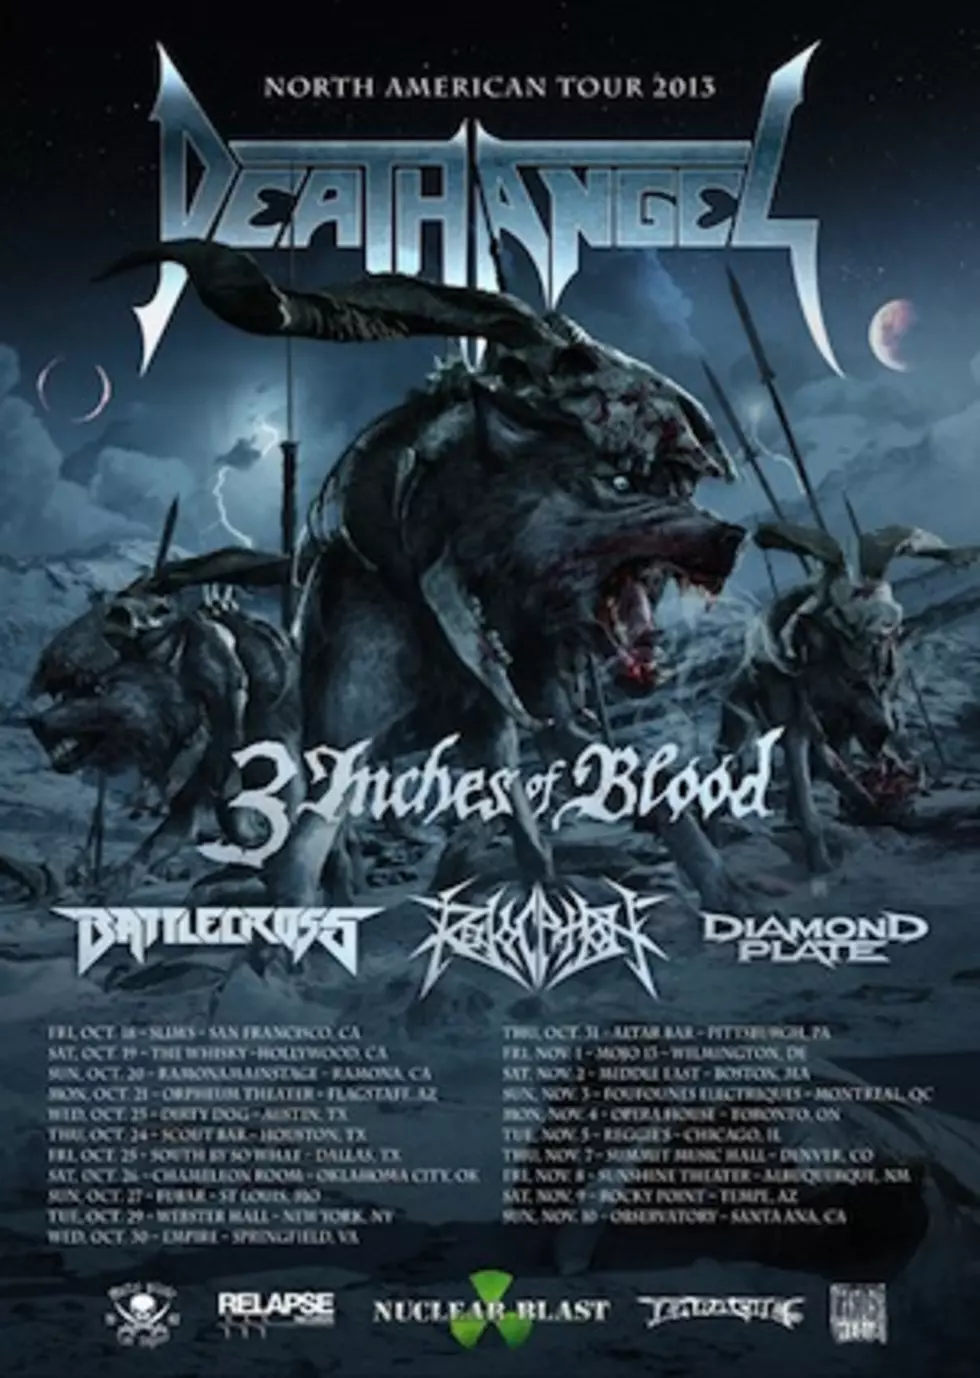 Death Angel, Battlecross + 3 Inches of Blood Unite for Fall 2013 Tour